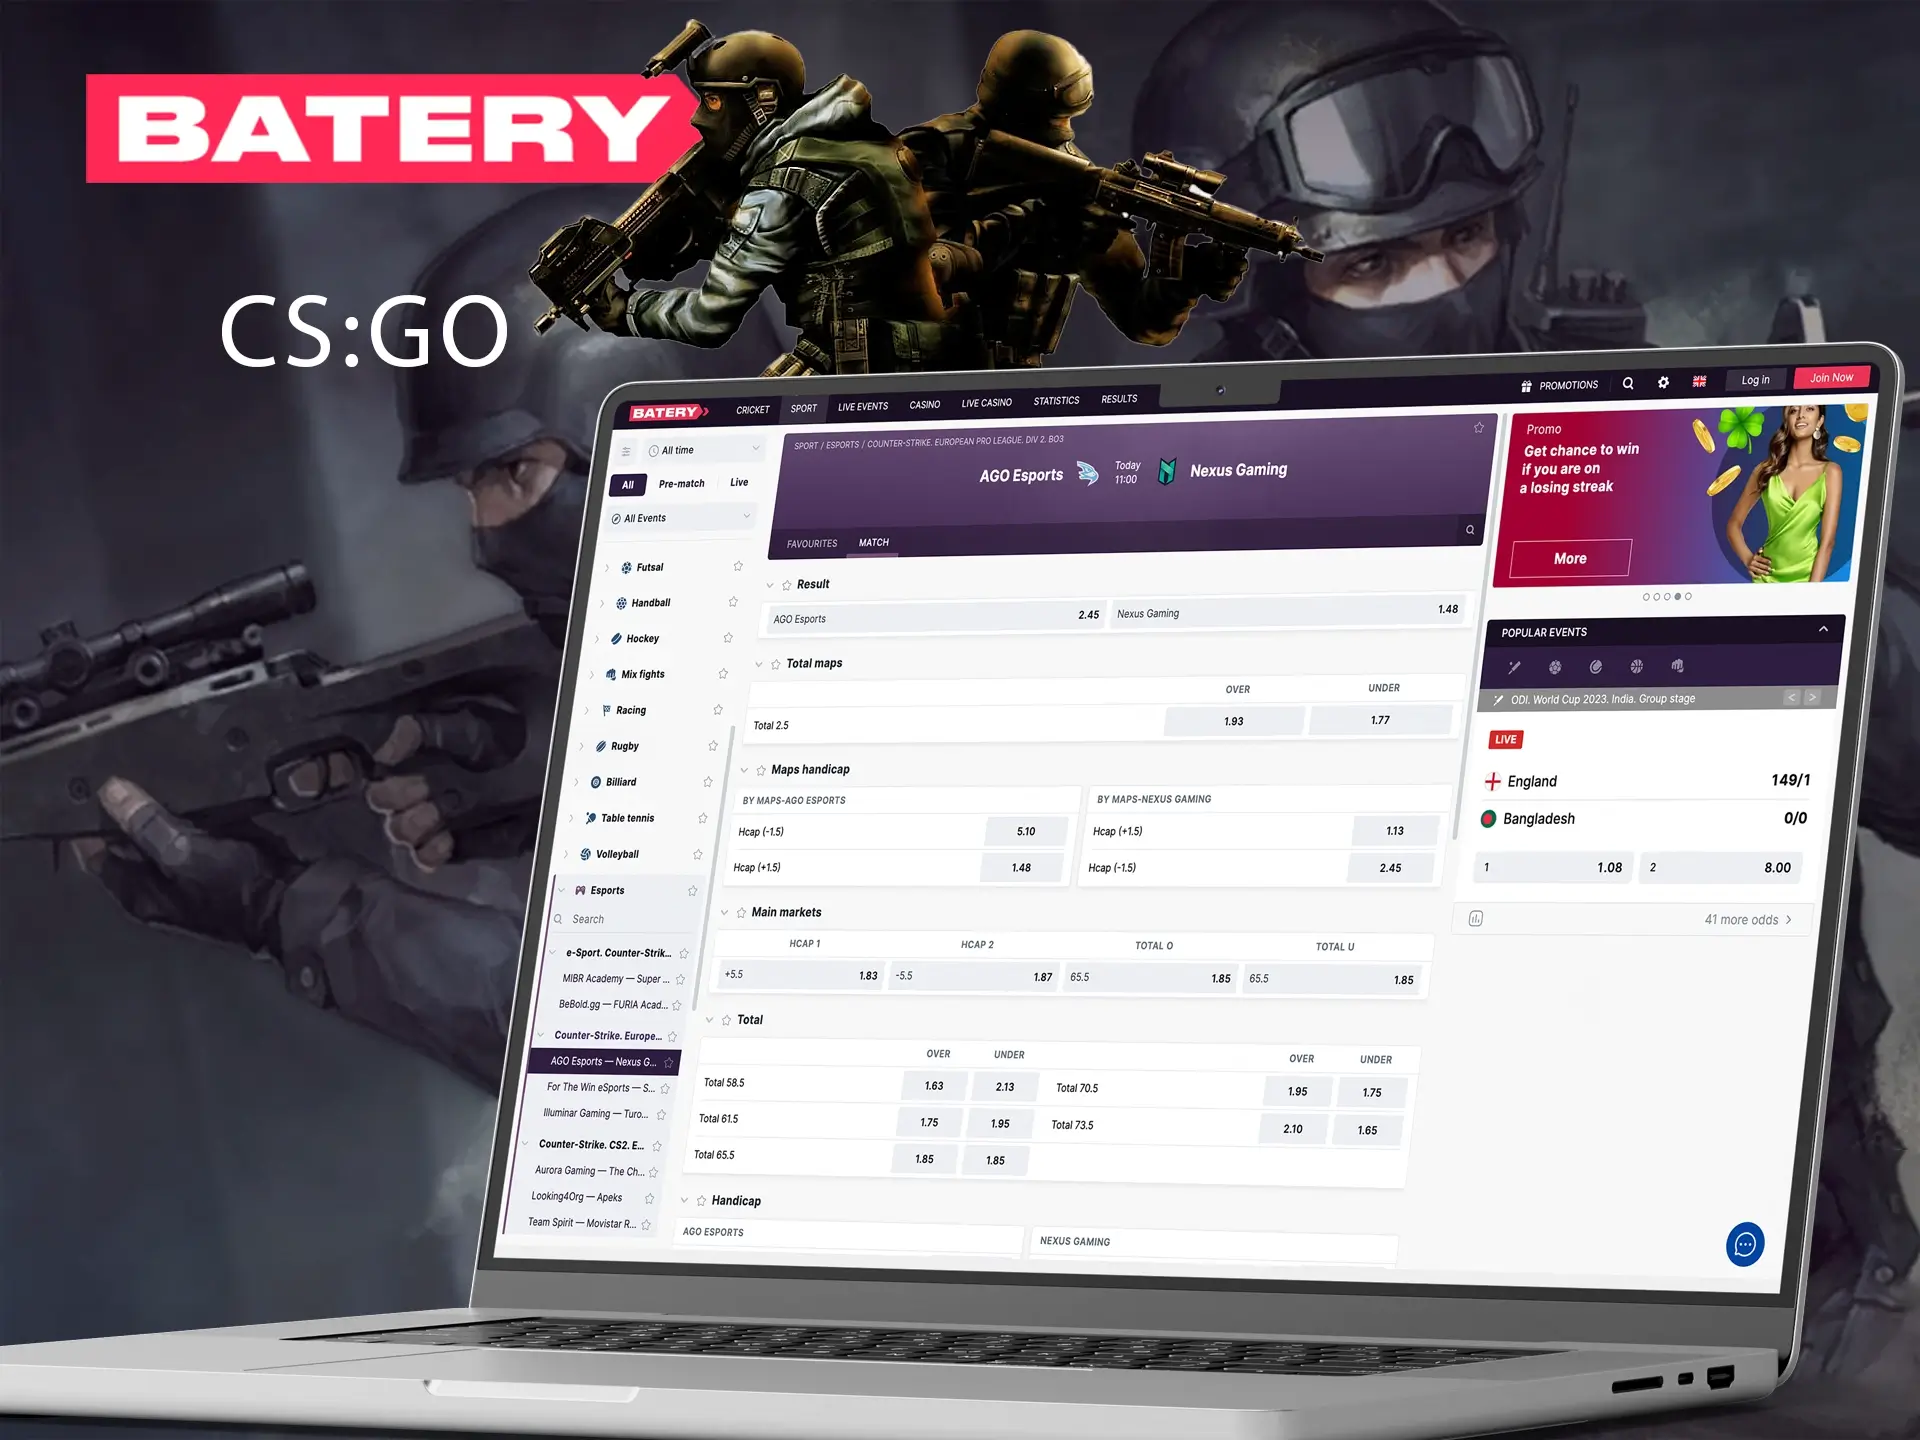 On the Batery website you can spot a cybersport discipline like cs:go, it is an eminent shooter with a lot of tournaments.